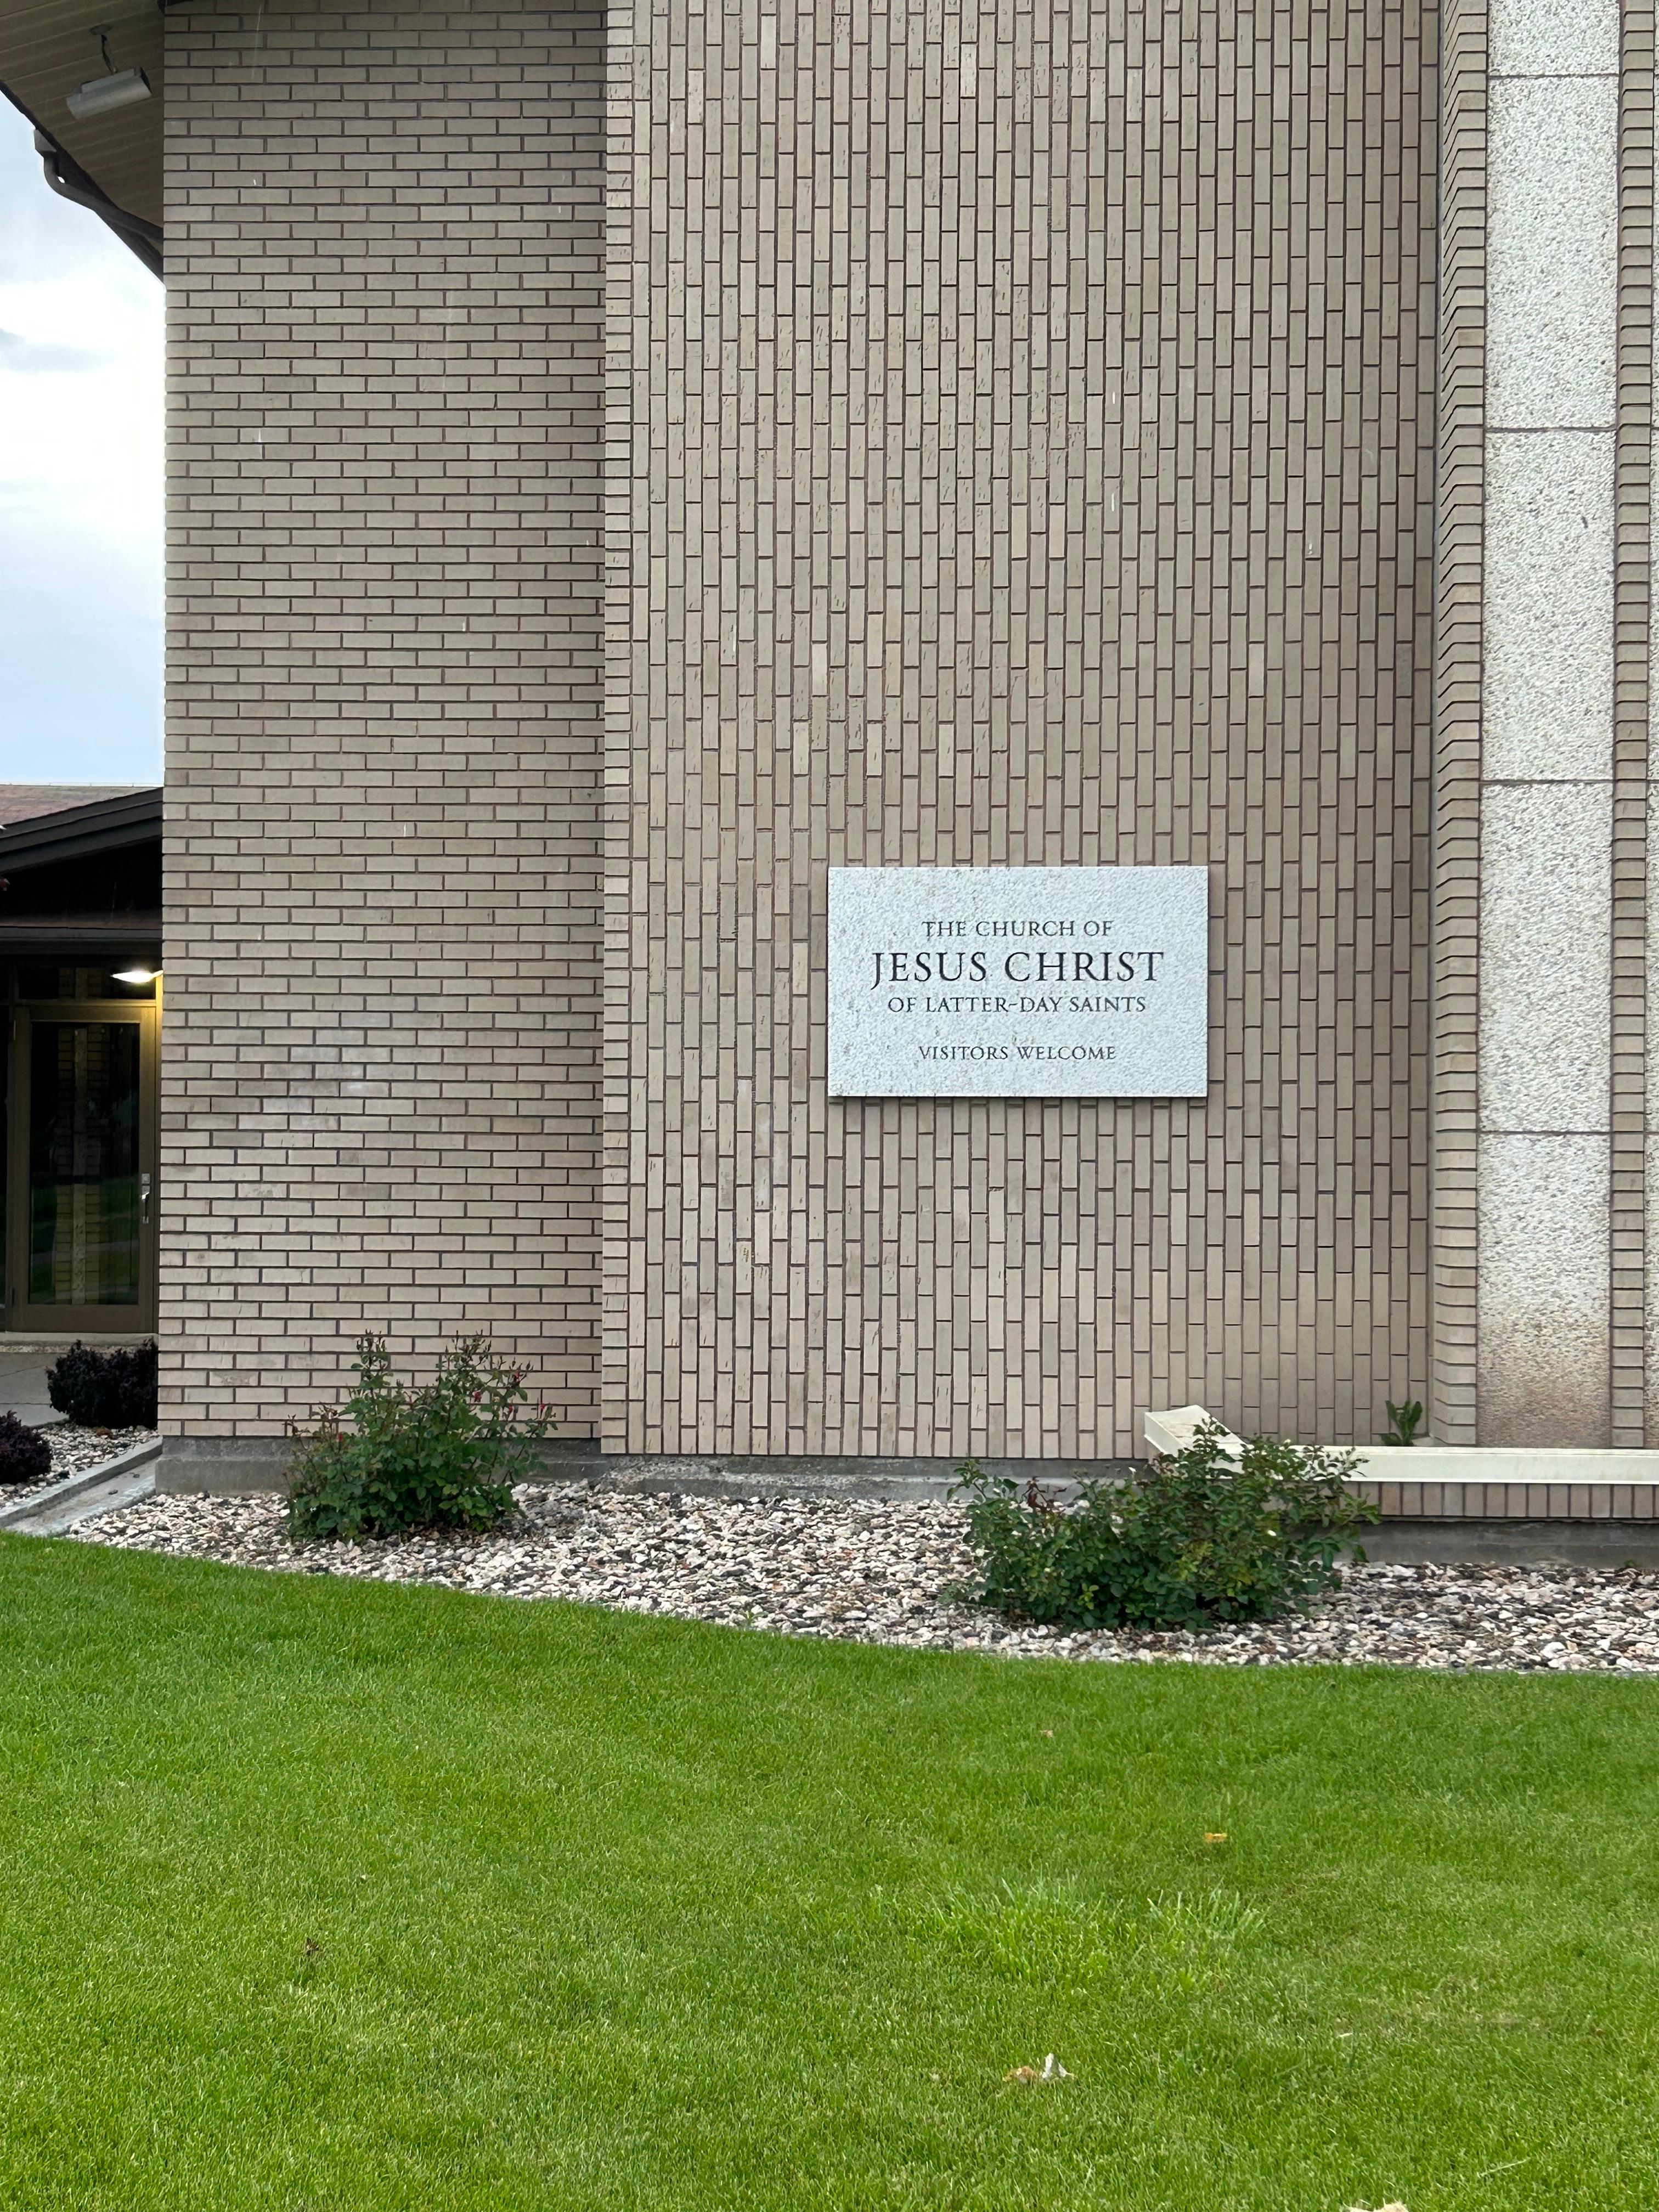 South Entrance of the Fort Hall Building of The Church of Jesus Christ of Latter-Day Saints located at 333 South Treaty Hwy (US 91)
in Pocatello, ID.